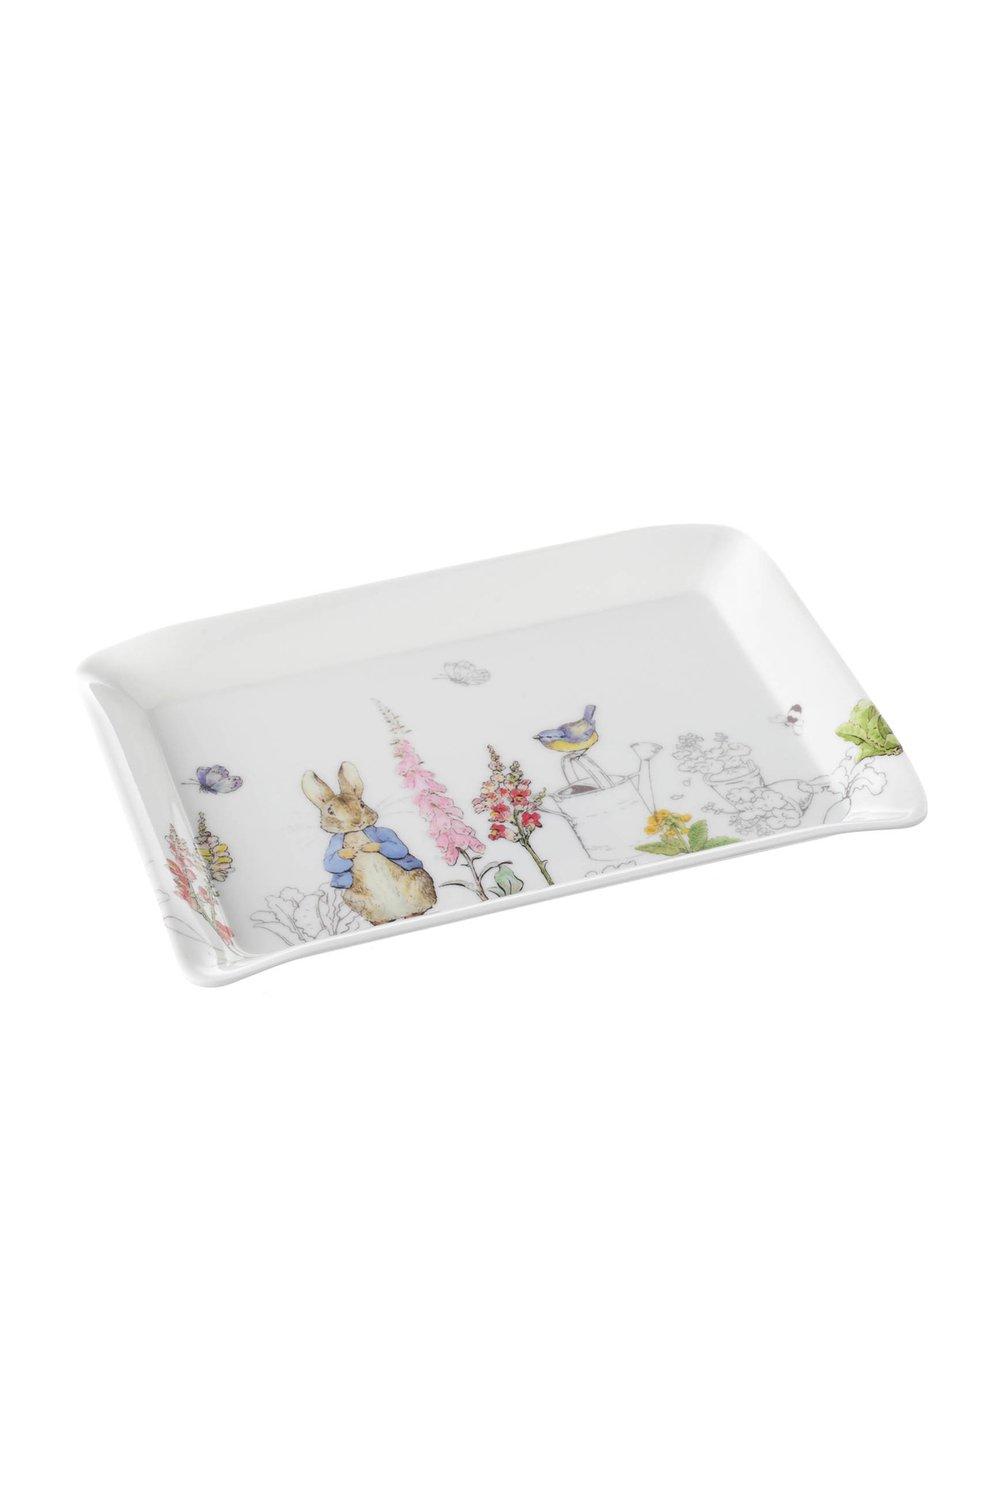 Classic Peter Rabbit Scatter Tray